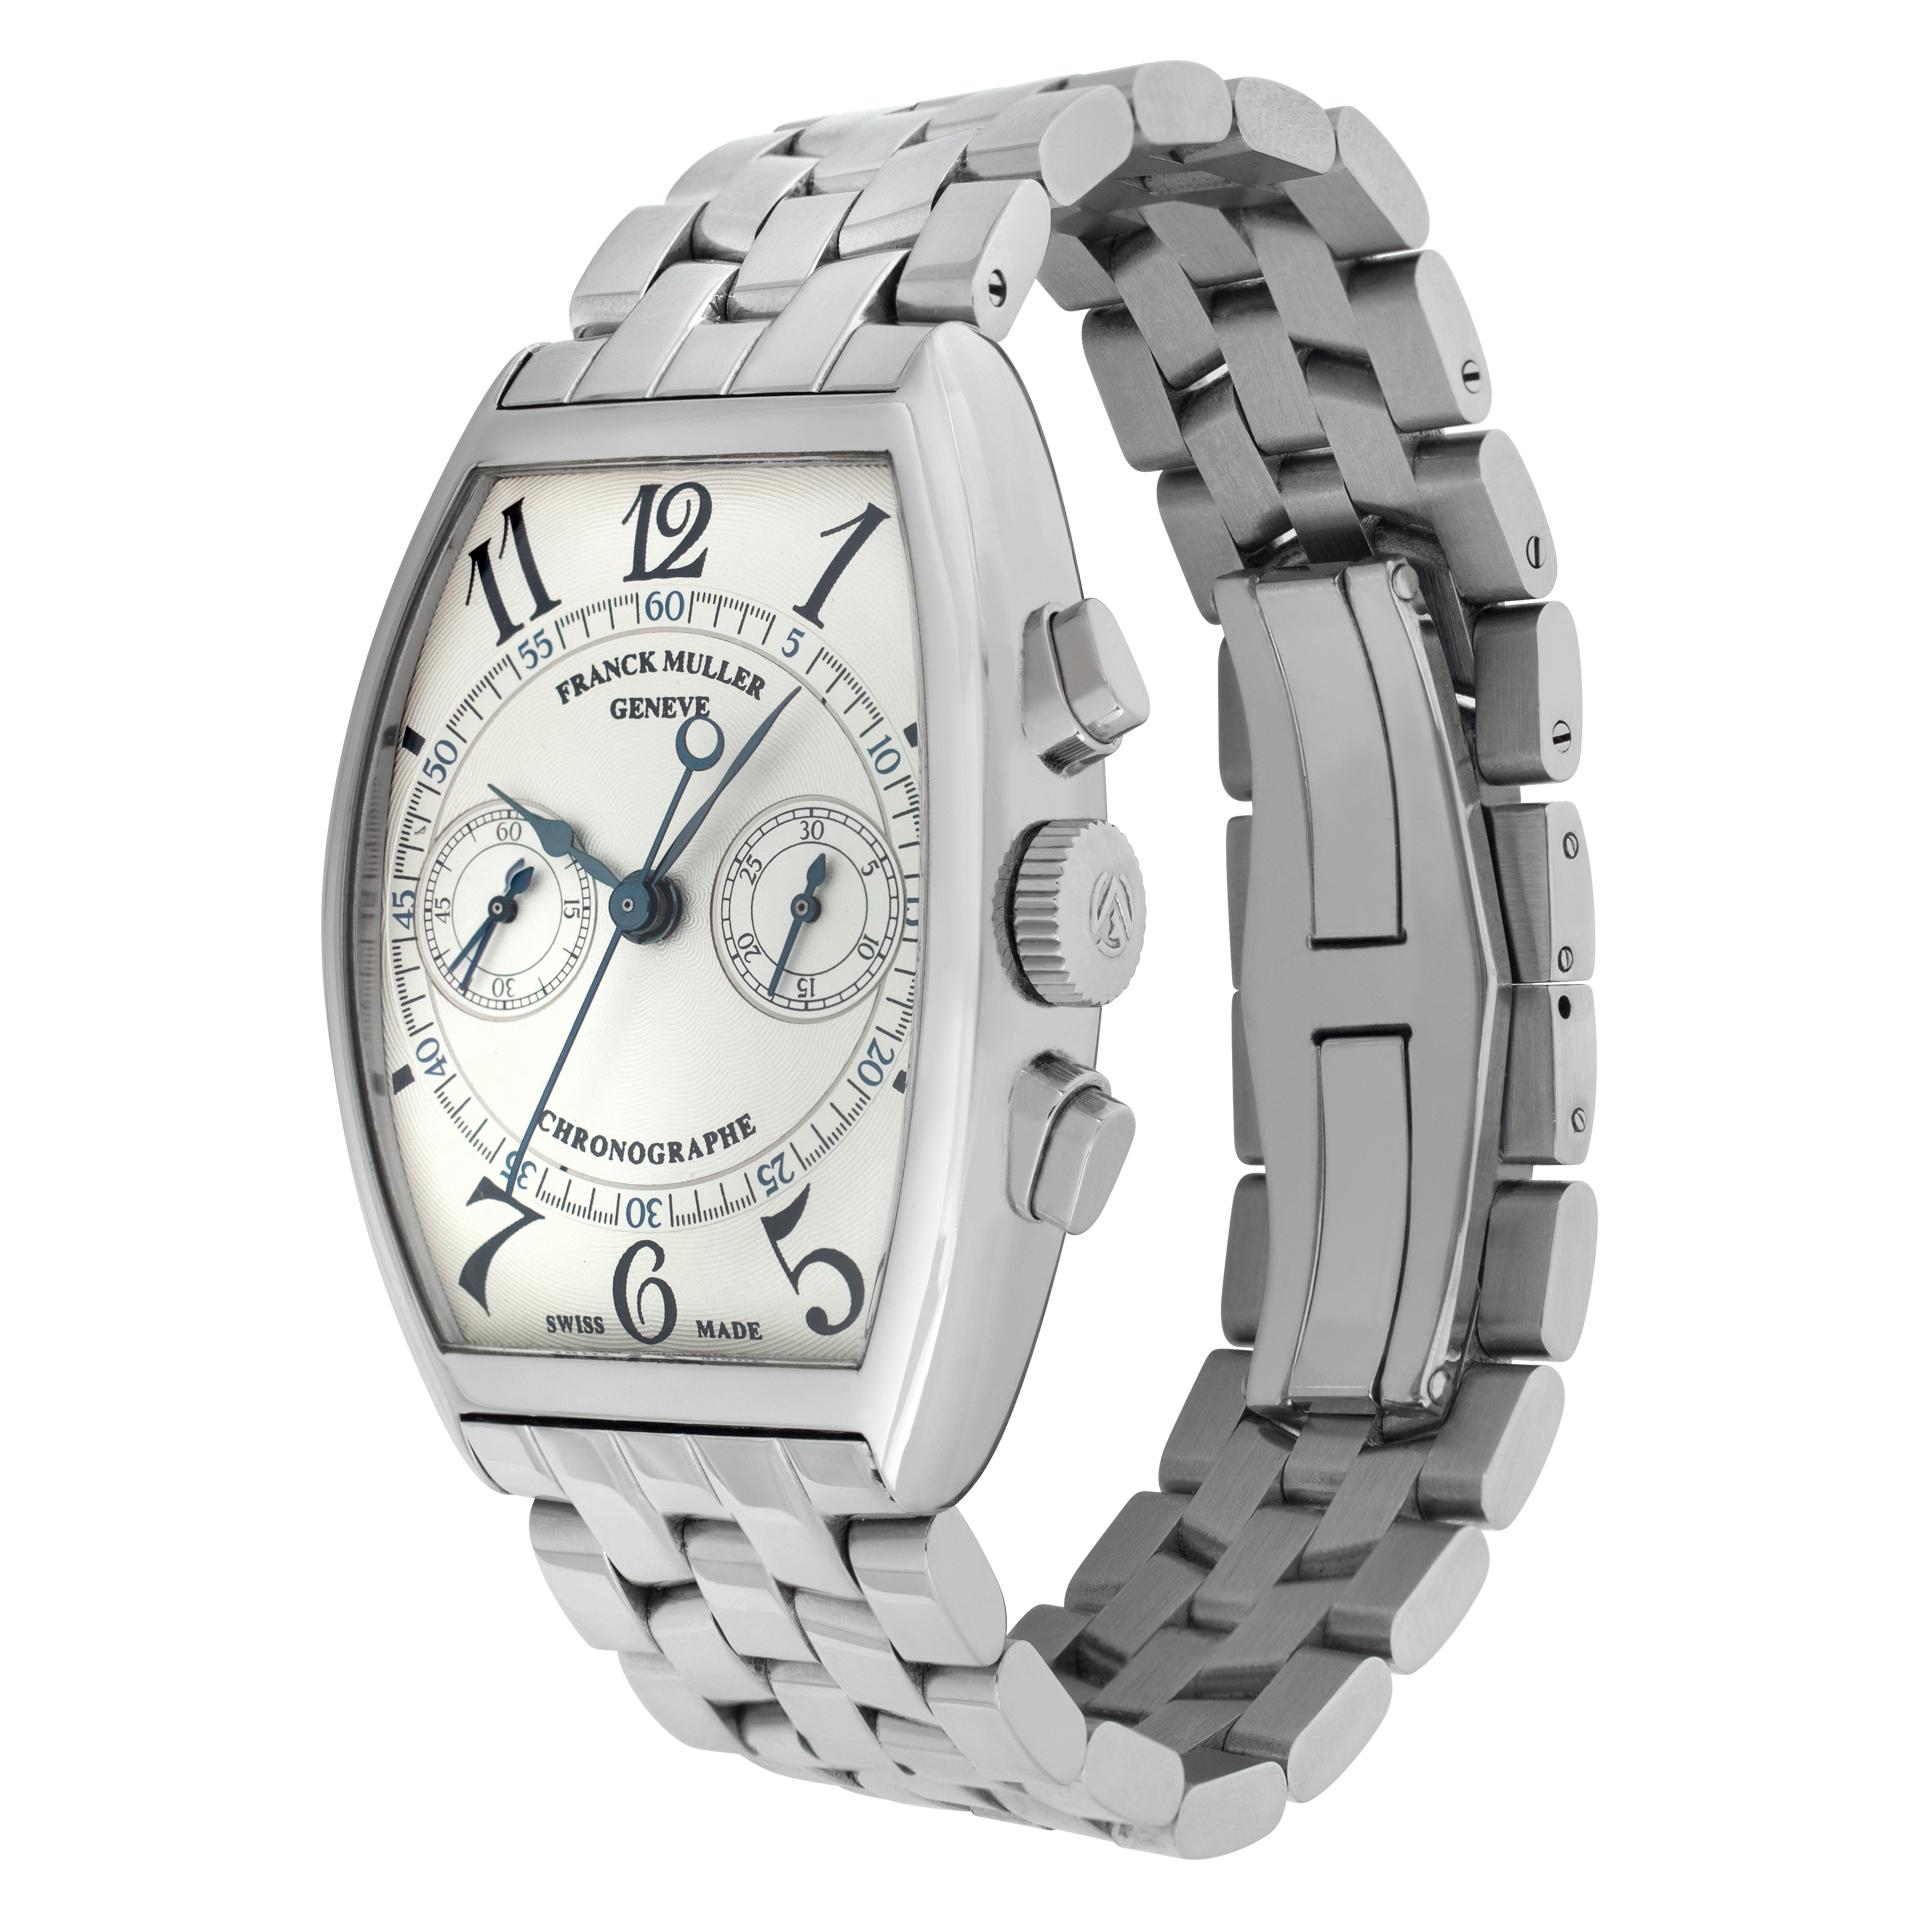 Franck Muller Casablanca in stainless steel. Auto w/ subseconds, and chronograph. 45 mm length (lug to lug) by 39 mm width case size. Ref 5850 CC. Fine Pre-owned Franck Muller Watch. Certified preowned Classic Franck Muller Casablanca 5850 CC watch